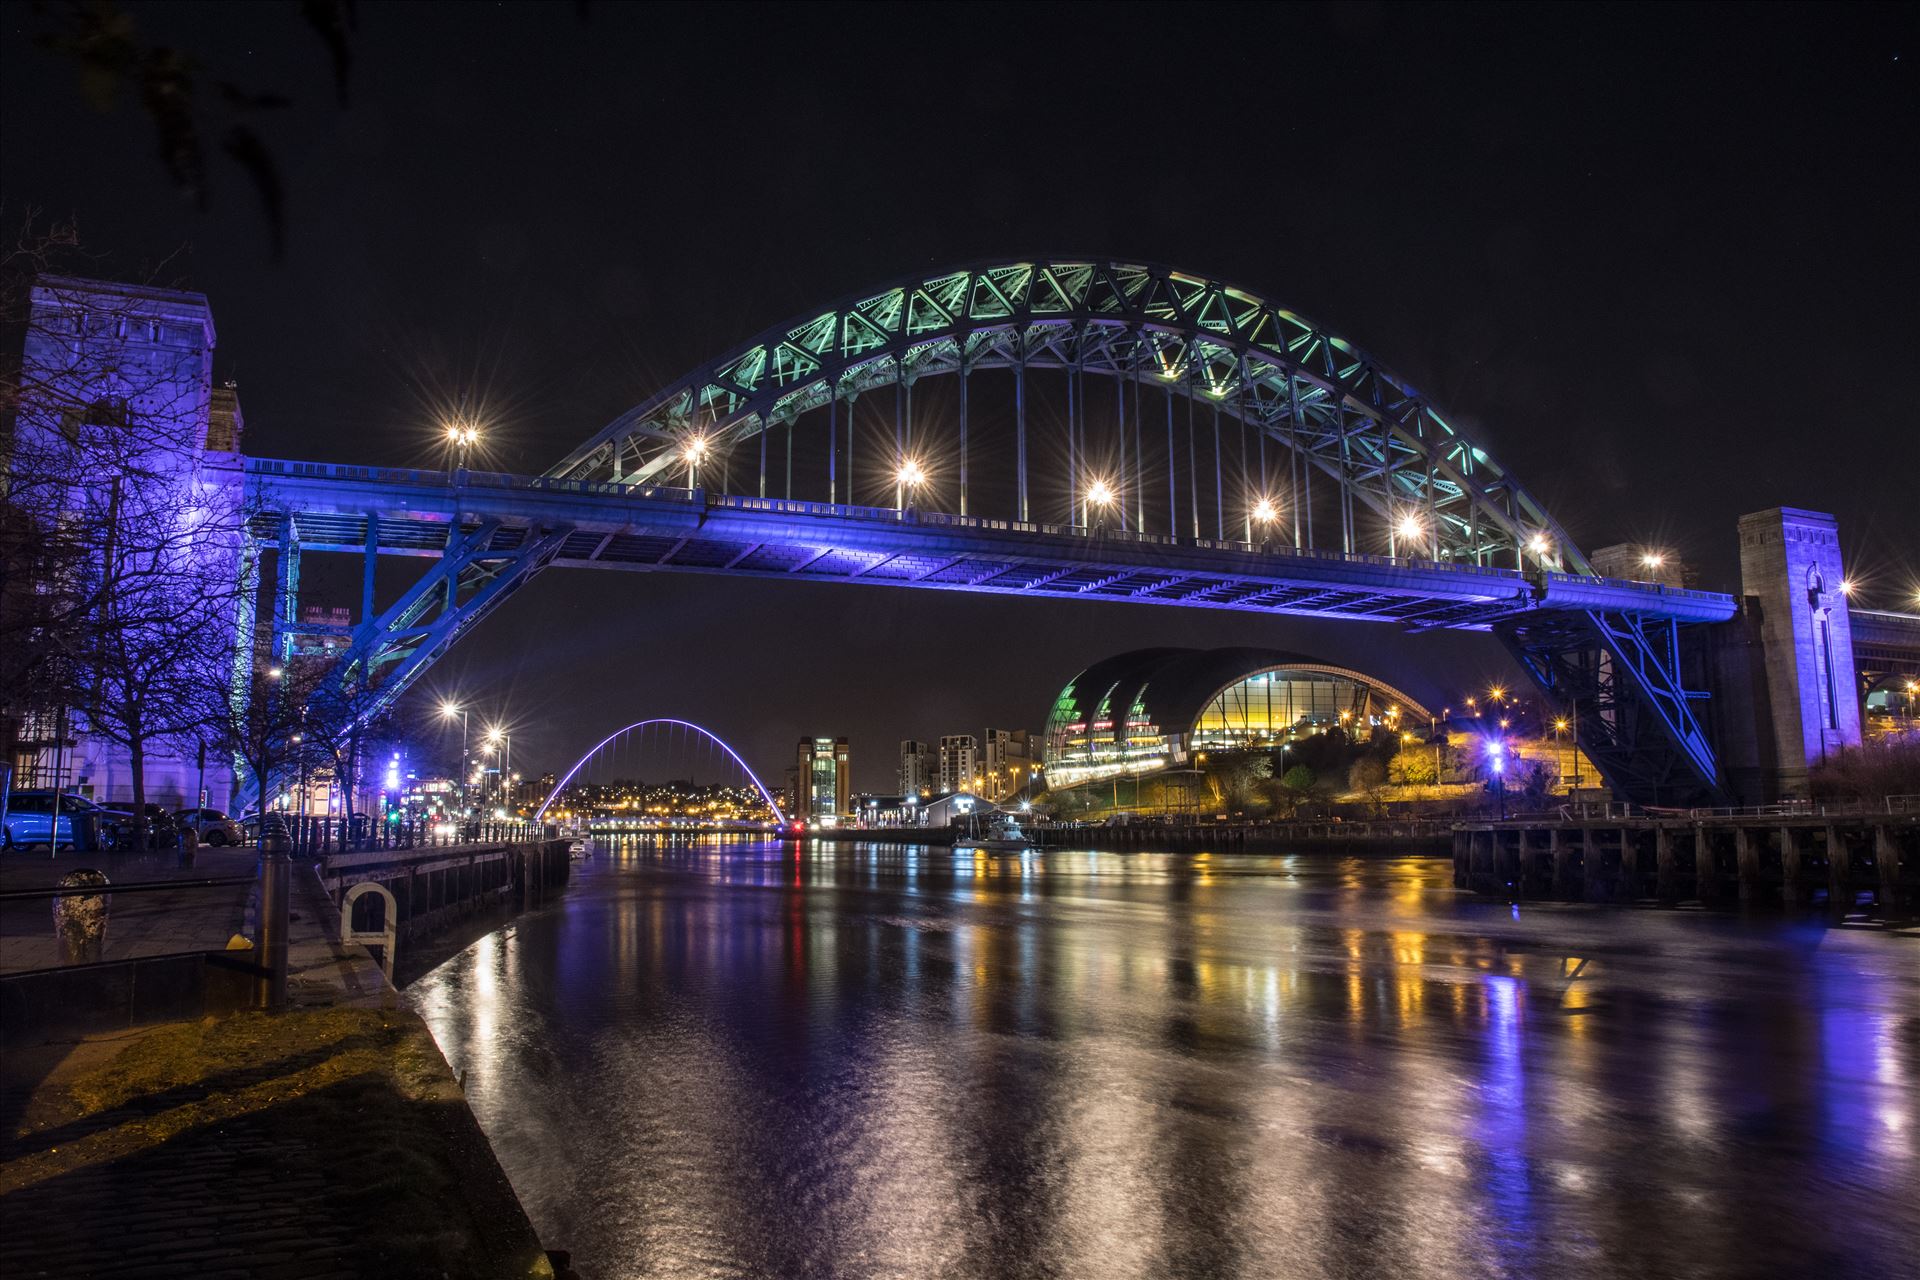 The River Tyne at night  by philreay